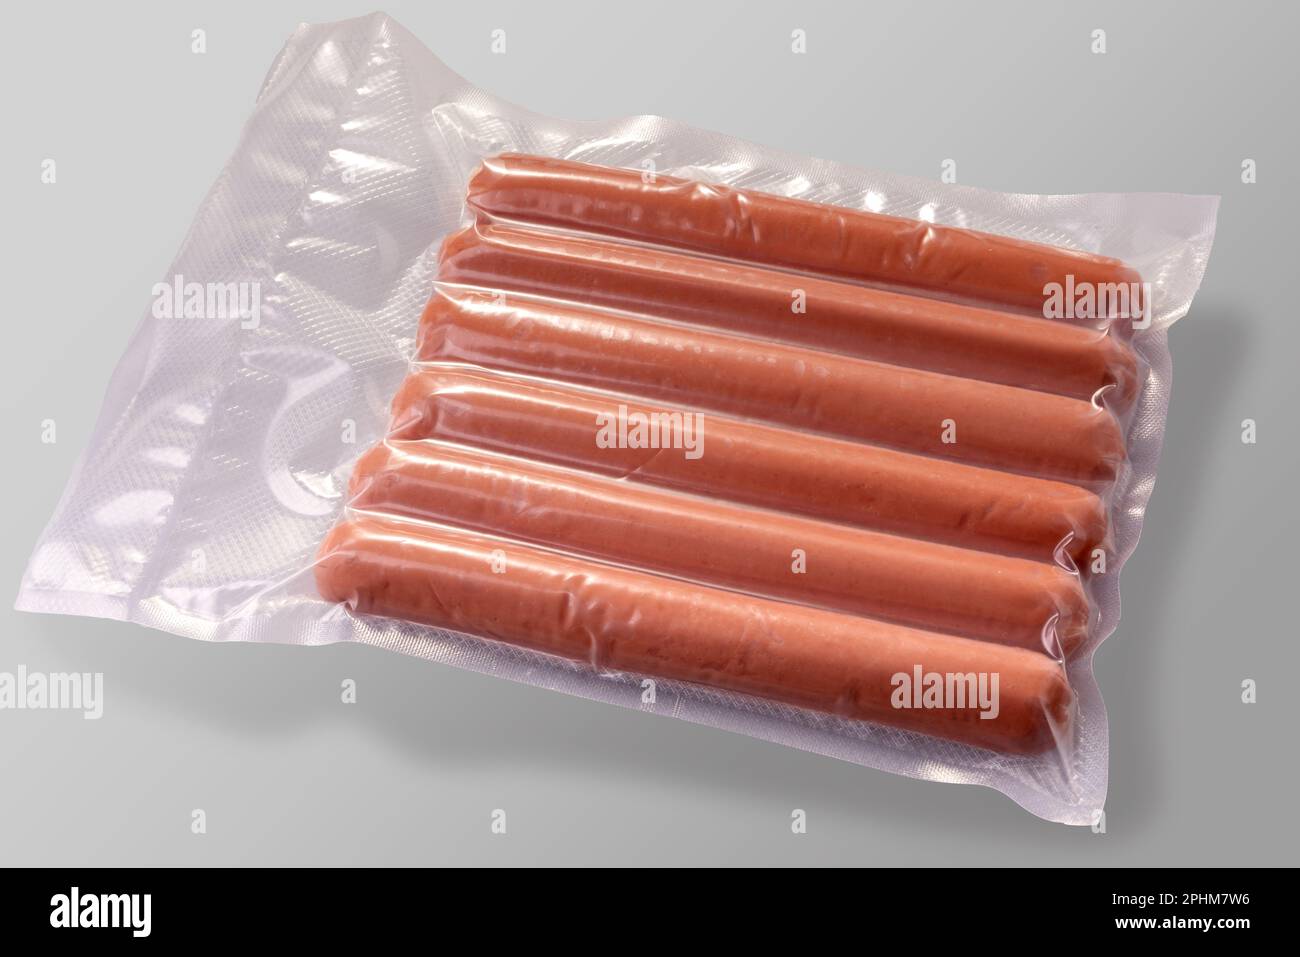 wurstel sausage or Vienna sausages in vacuum pack for sous vide cooking isolated on white with clipping path included. Stock Photo